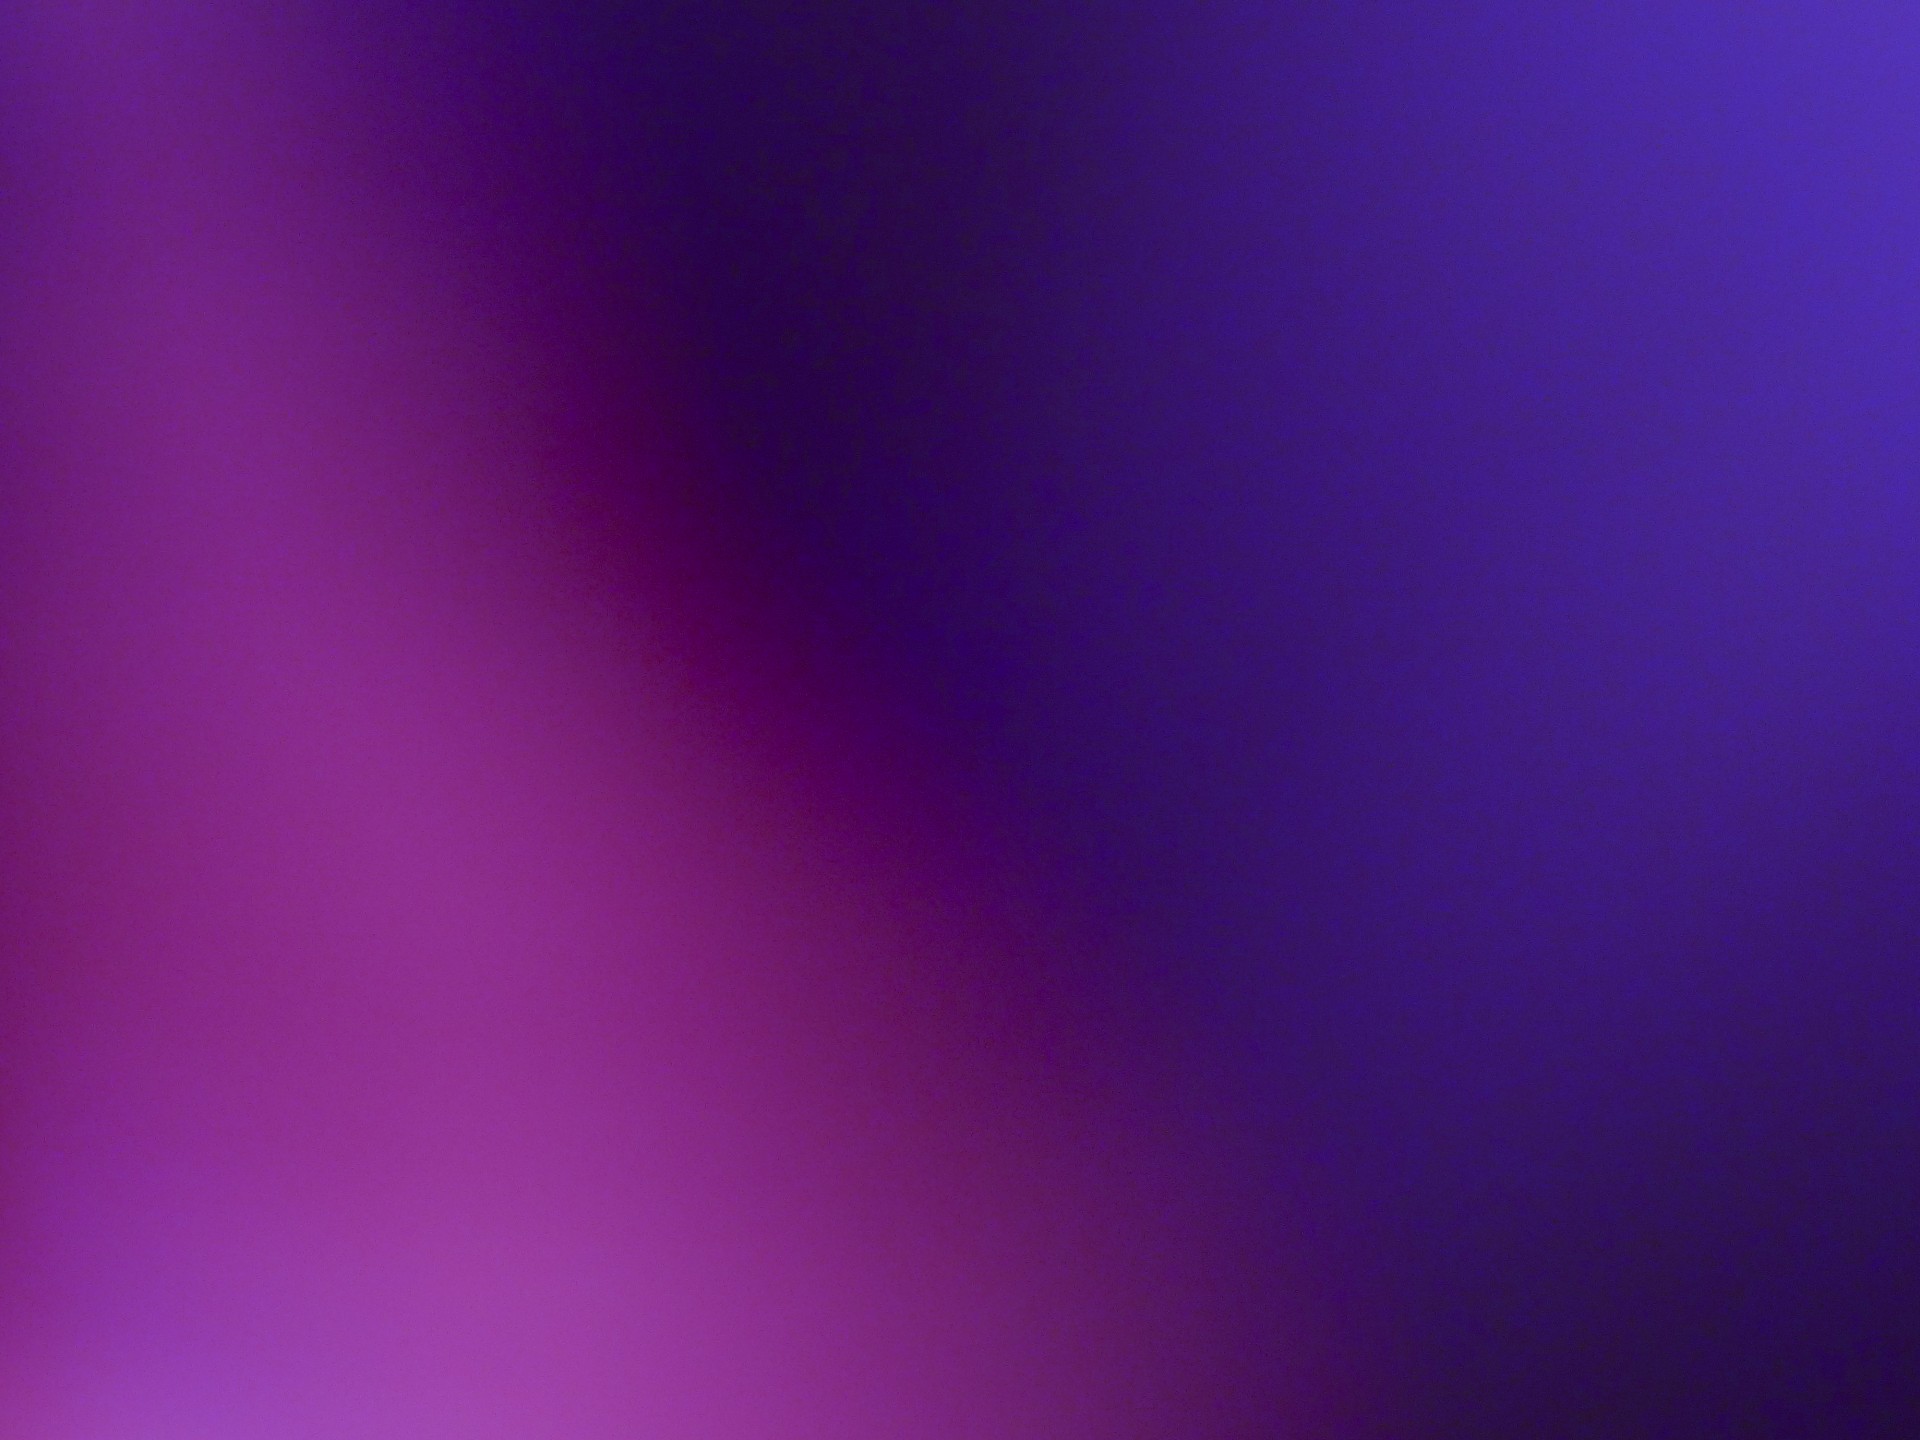 1920x1440 Purple And Pink Background